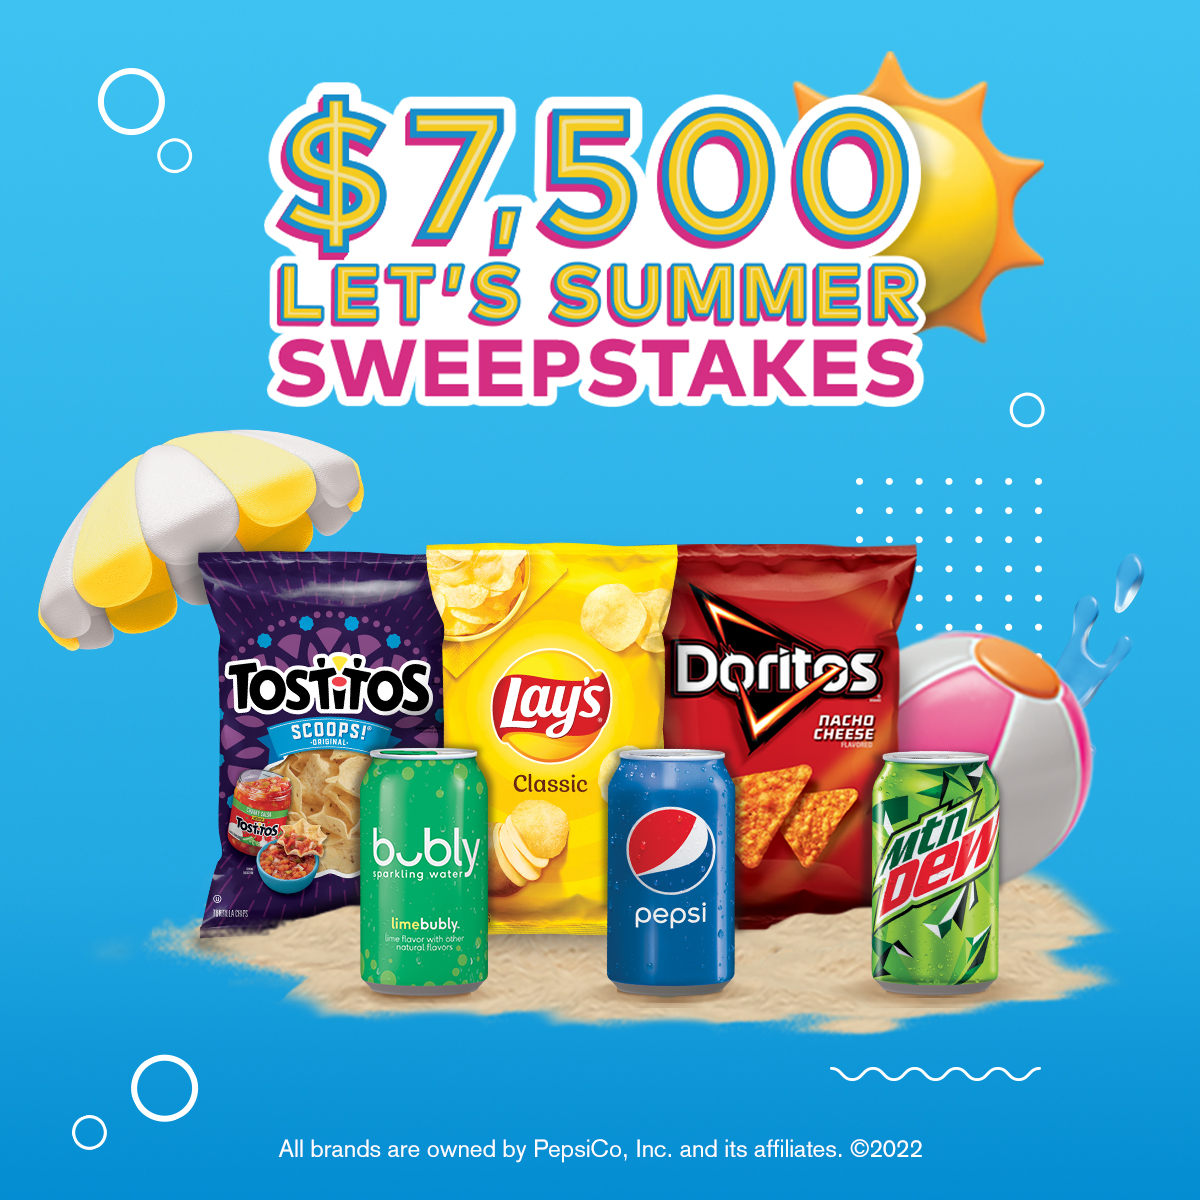 $7,500 Let’s Summer Sweepstakes